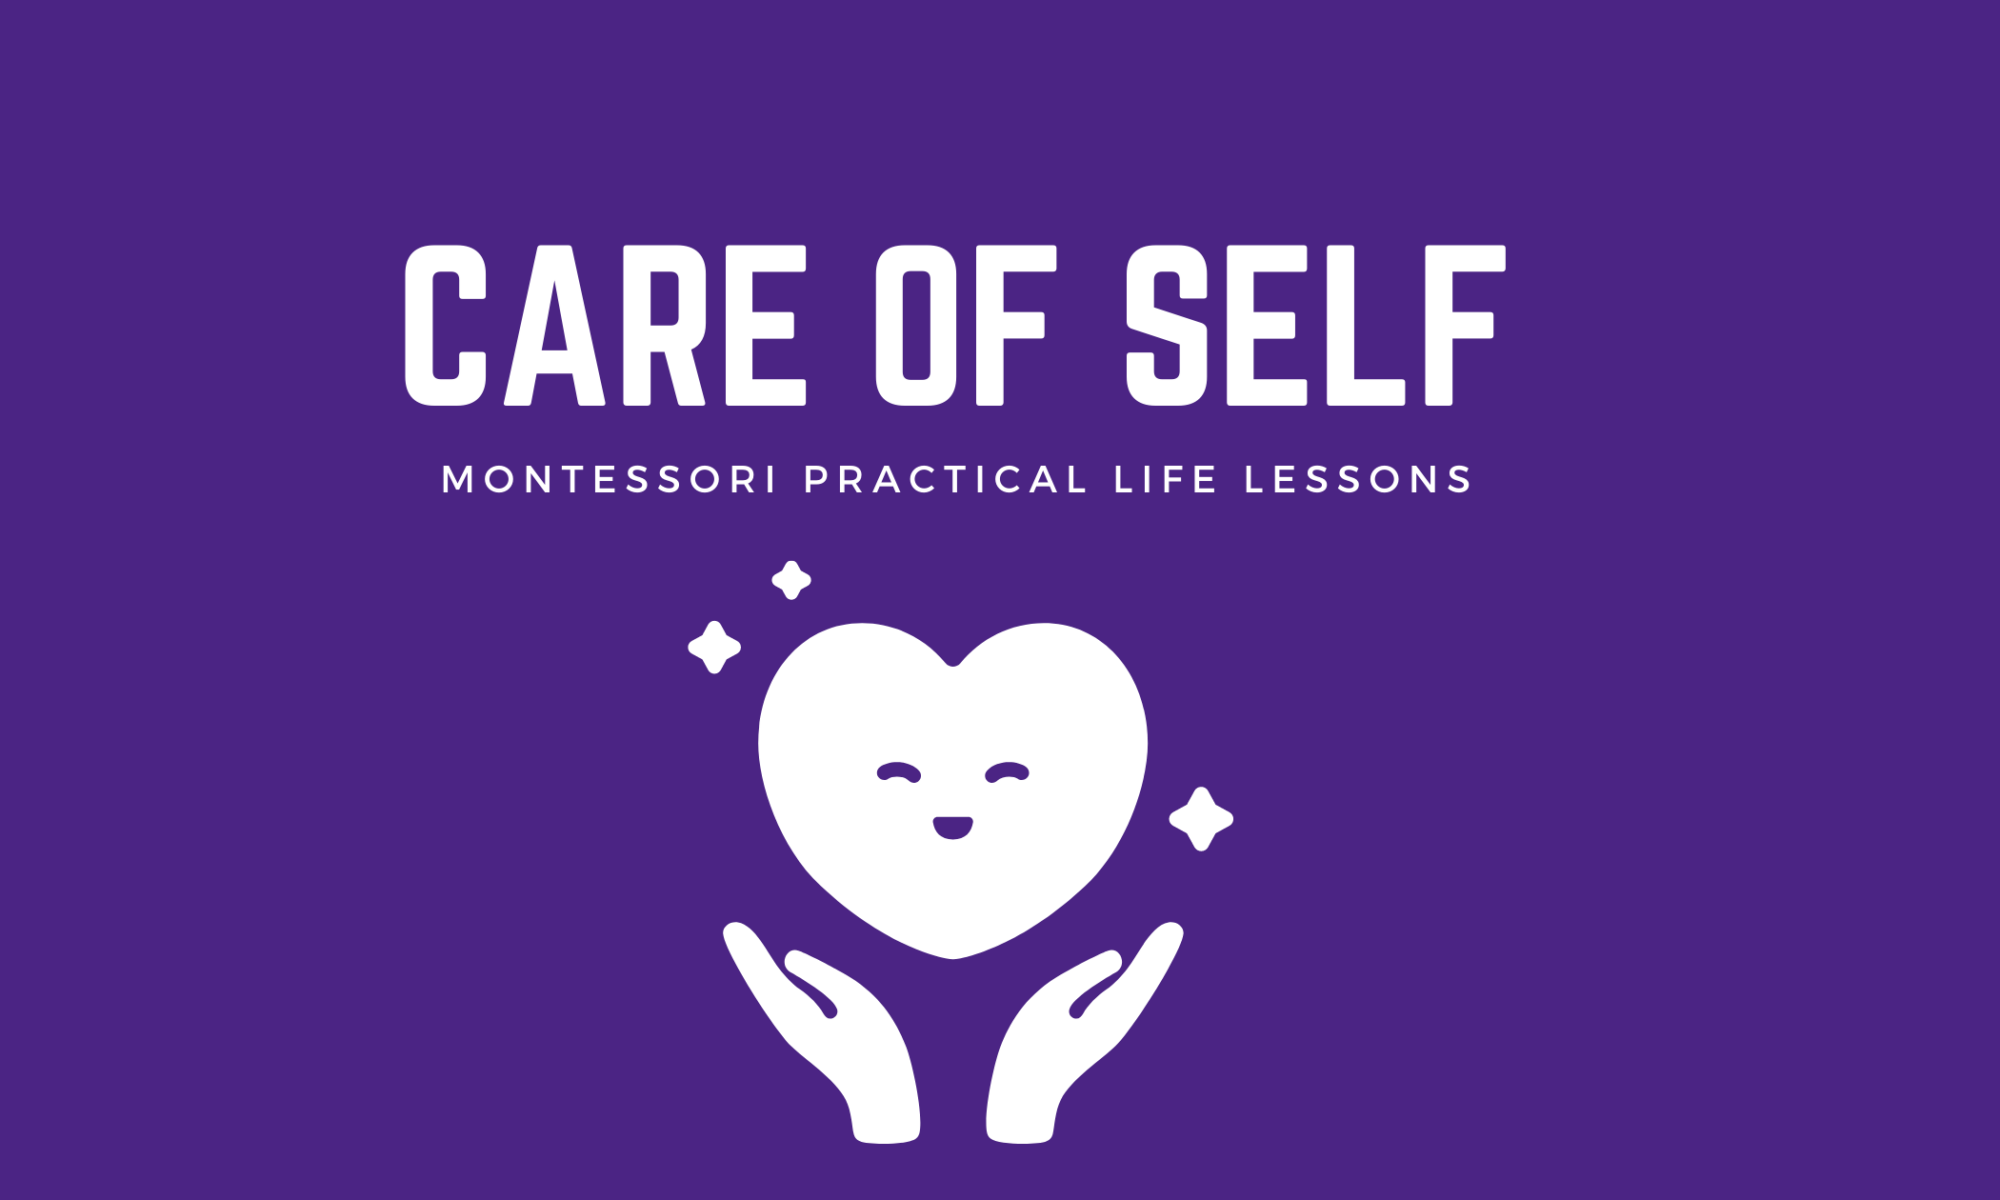 care of self montessori practical life lessons in white text above hands holding a heart on a dark purple background